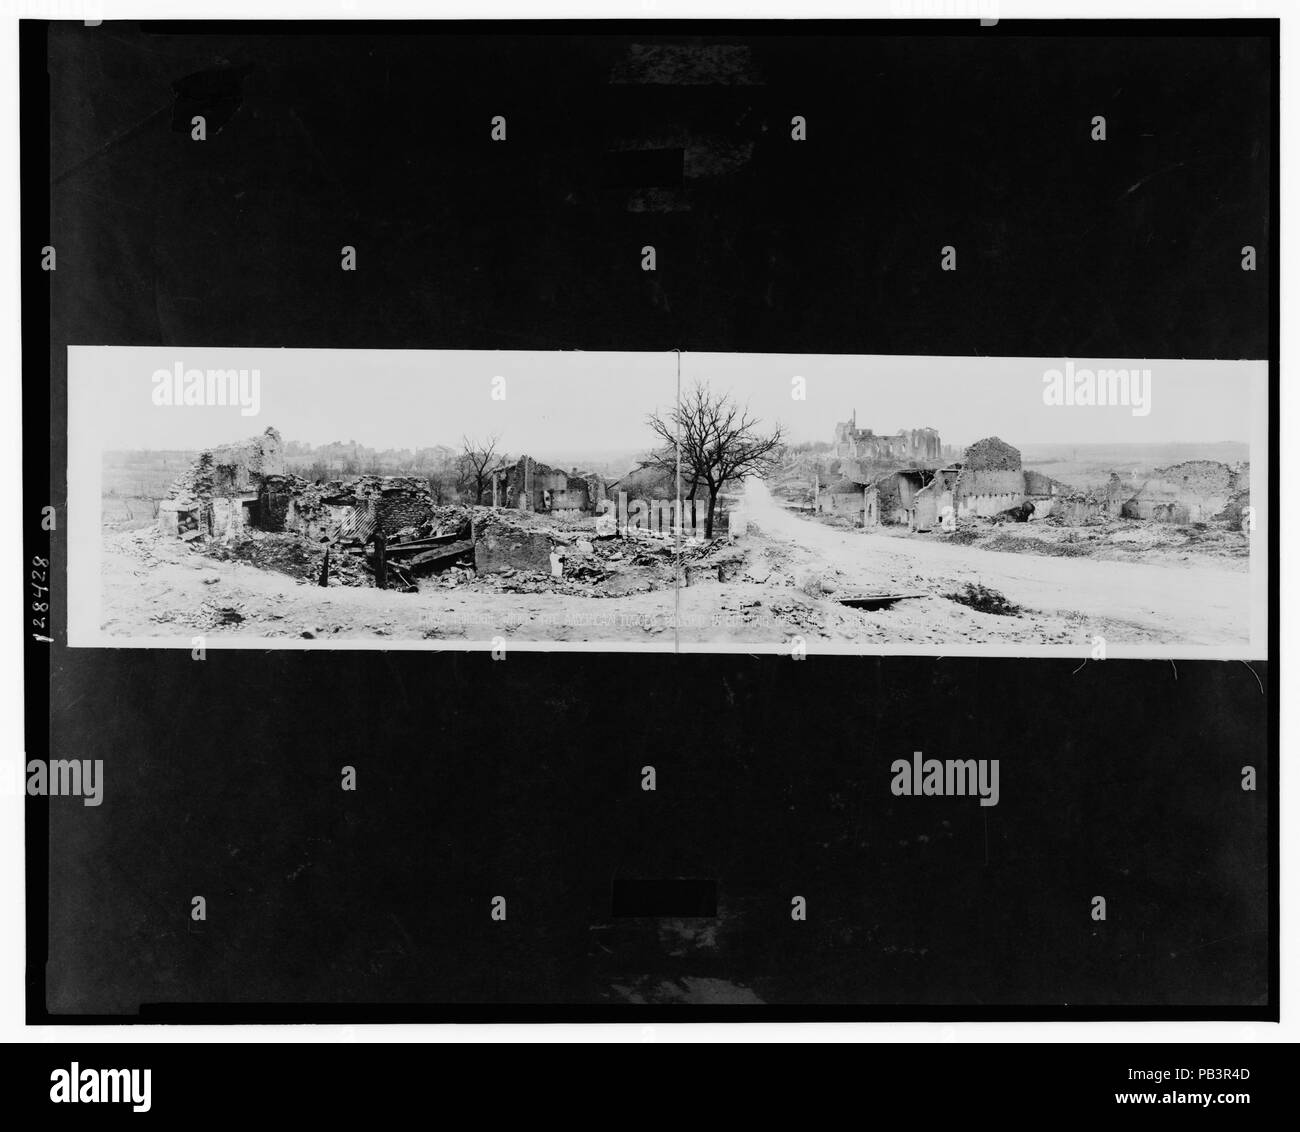 922 Limy, through which the American forces passed in cutting off the St. Mihiel Salient, 1918 LCCN2007663841 Stock Photo